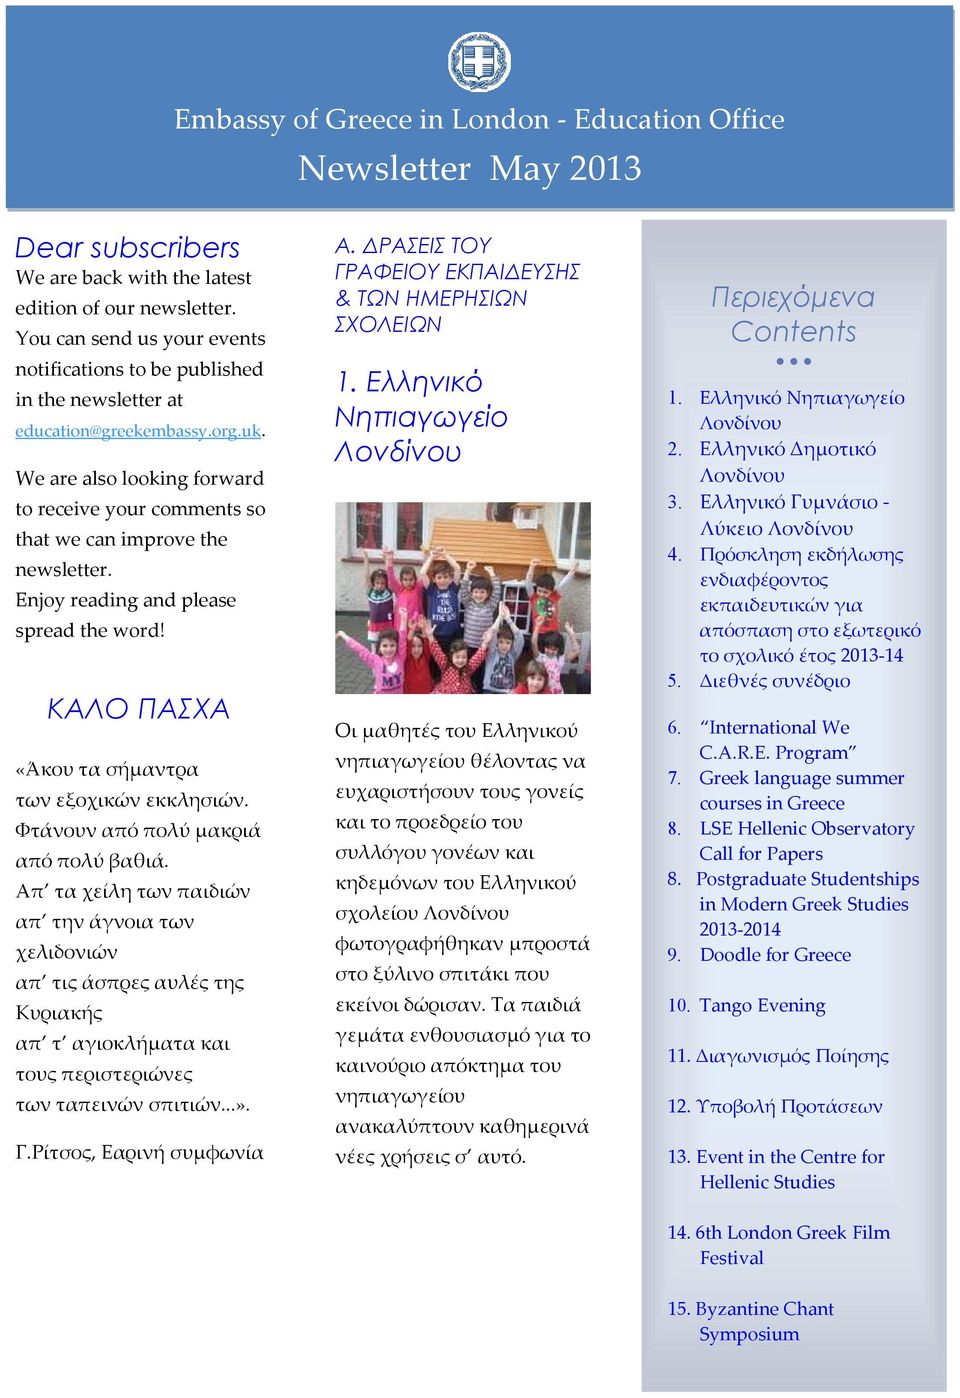 We are also looking forward to receive your comments so that we can improve the newsletter. Enjoy reading and please spread the word! ΚΑΛΟ ΠΑΣΧΑ «Άκου τα σήμαντρα των εξοχικών εκκλησιών.